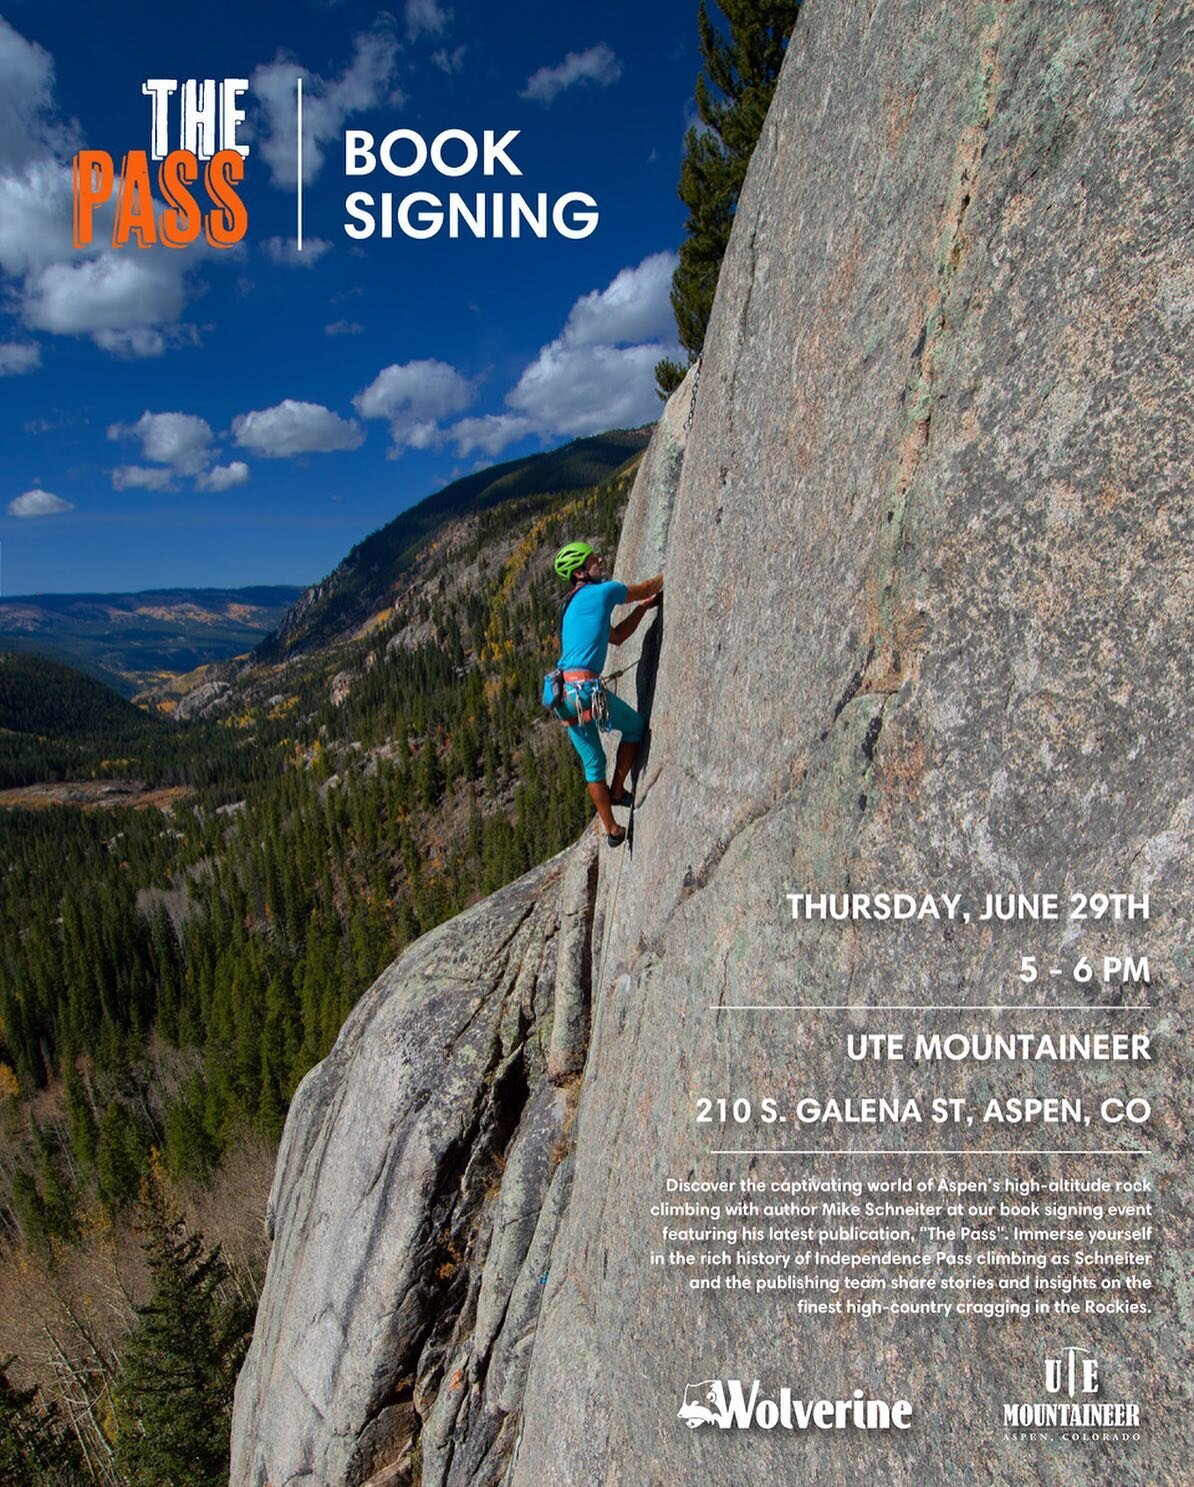 TONIGHT!!! Join us @utemountaineer for a book signing with local author @mike.schneiter @glenwoodclimbingguides. Share the stoke on Colorado&rsquo;s most historic alpine area. See you there!!